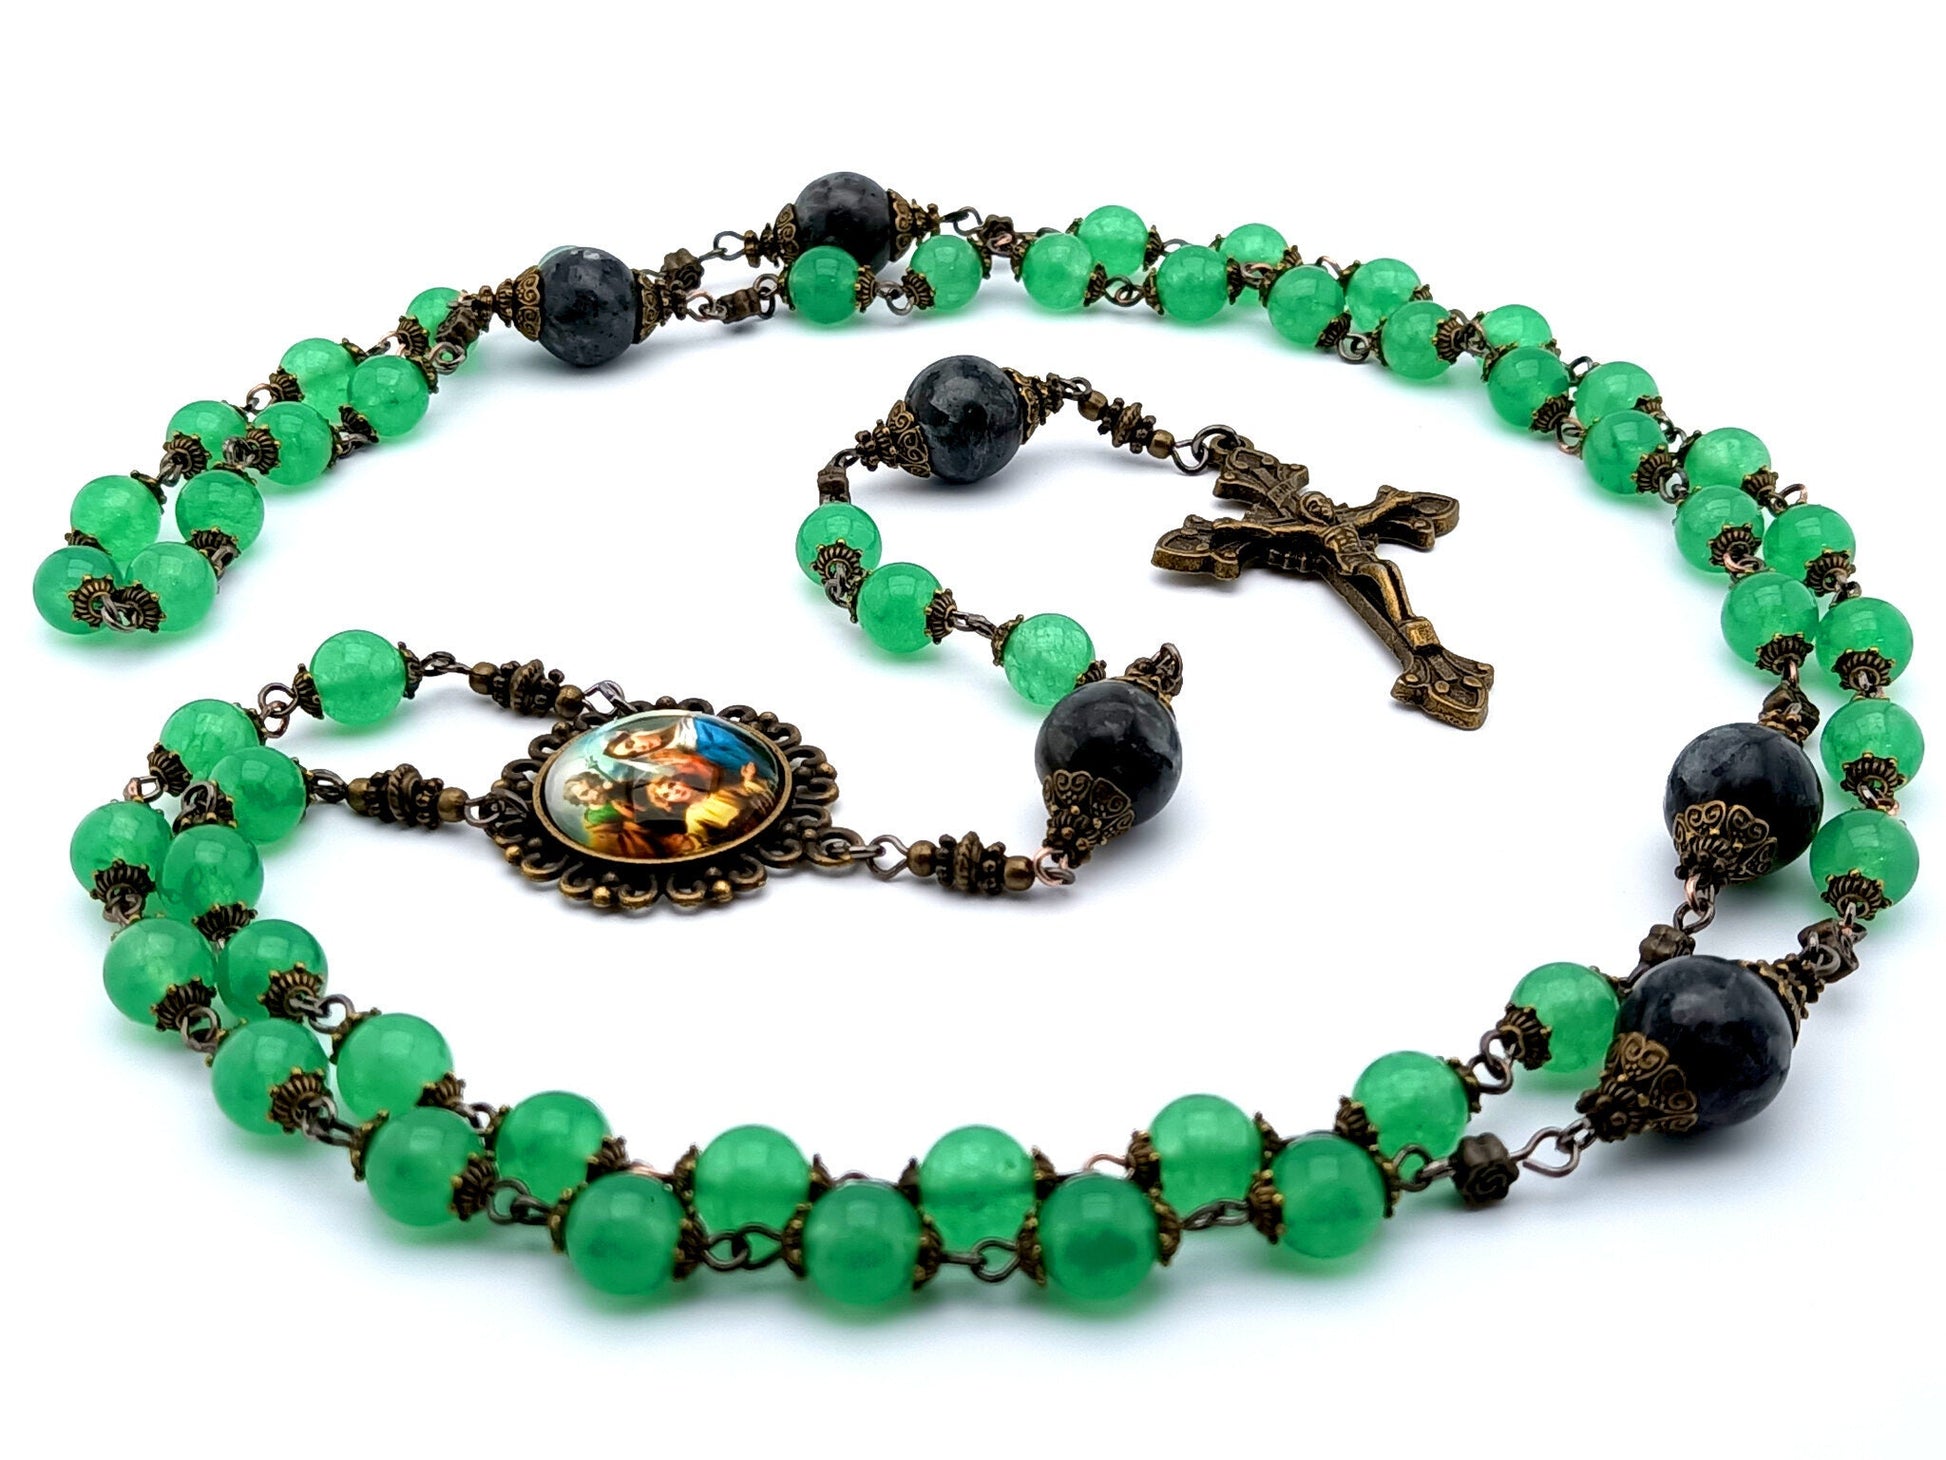 Holy Family unique rosary beads with green jade gemstone beads, bronze crucifix, picture centre medal and labradorite pater beads.